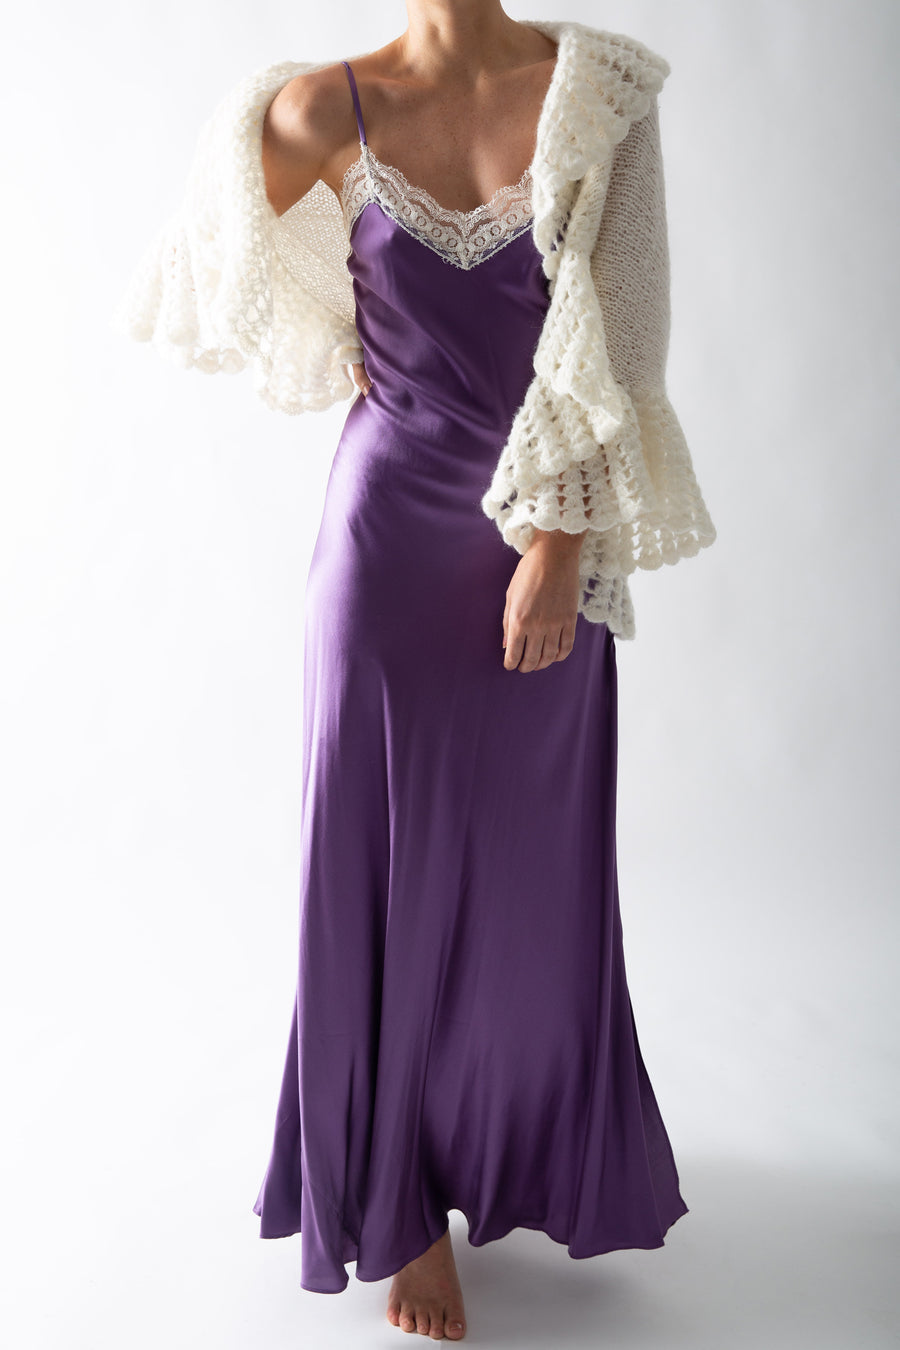 This is a photo of a woman wearing a plum colored silk slip dress with lace trim at the neckline. She wears a white knit ruffle cardigan overtop.